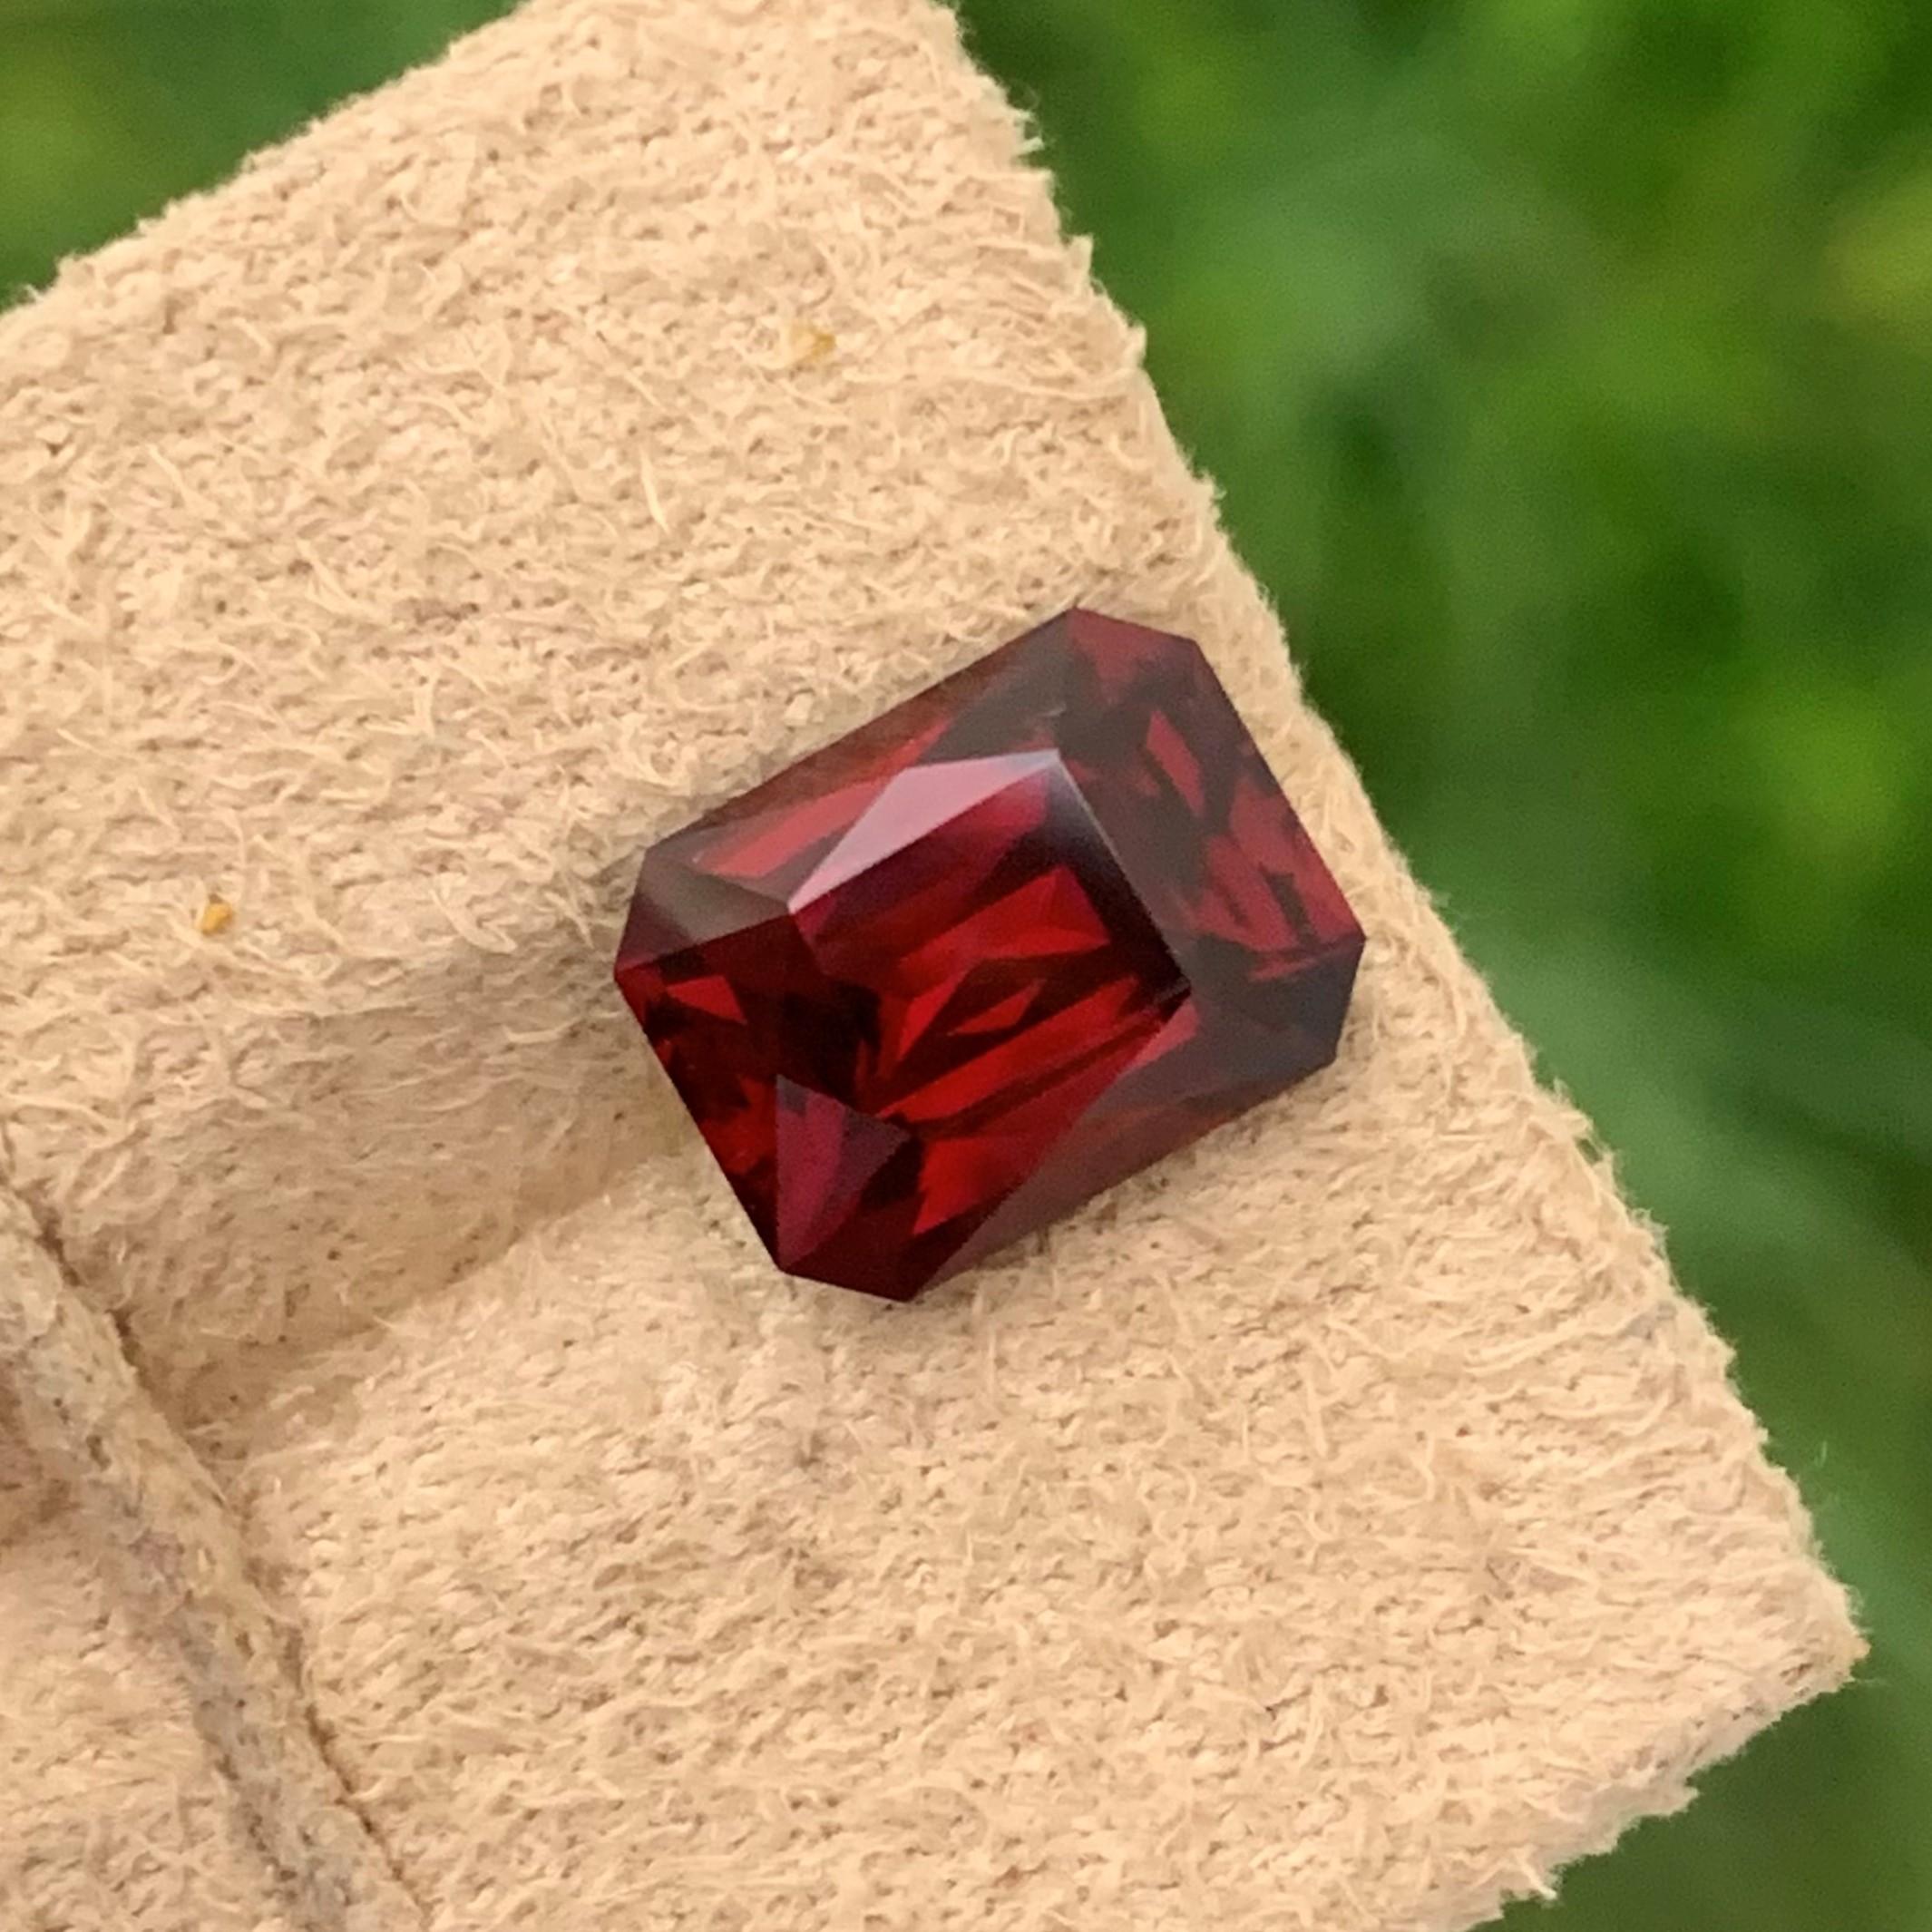 Faceted Rhodolite Garnet
Weight: 5.15 Carats
Dimension: 10.4x8.1x6.3 Mm
Origin: Tanzania Africa
Color: Red
Treatment: Non
Shape: Emerald
Cut: Fancy
Certificate: On Demand
The Rhodolite resembles pomegranate seeds, since both are eternal both are